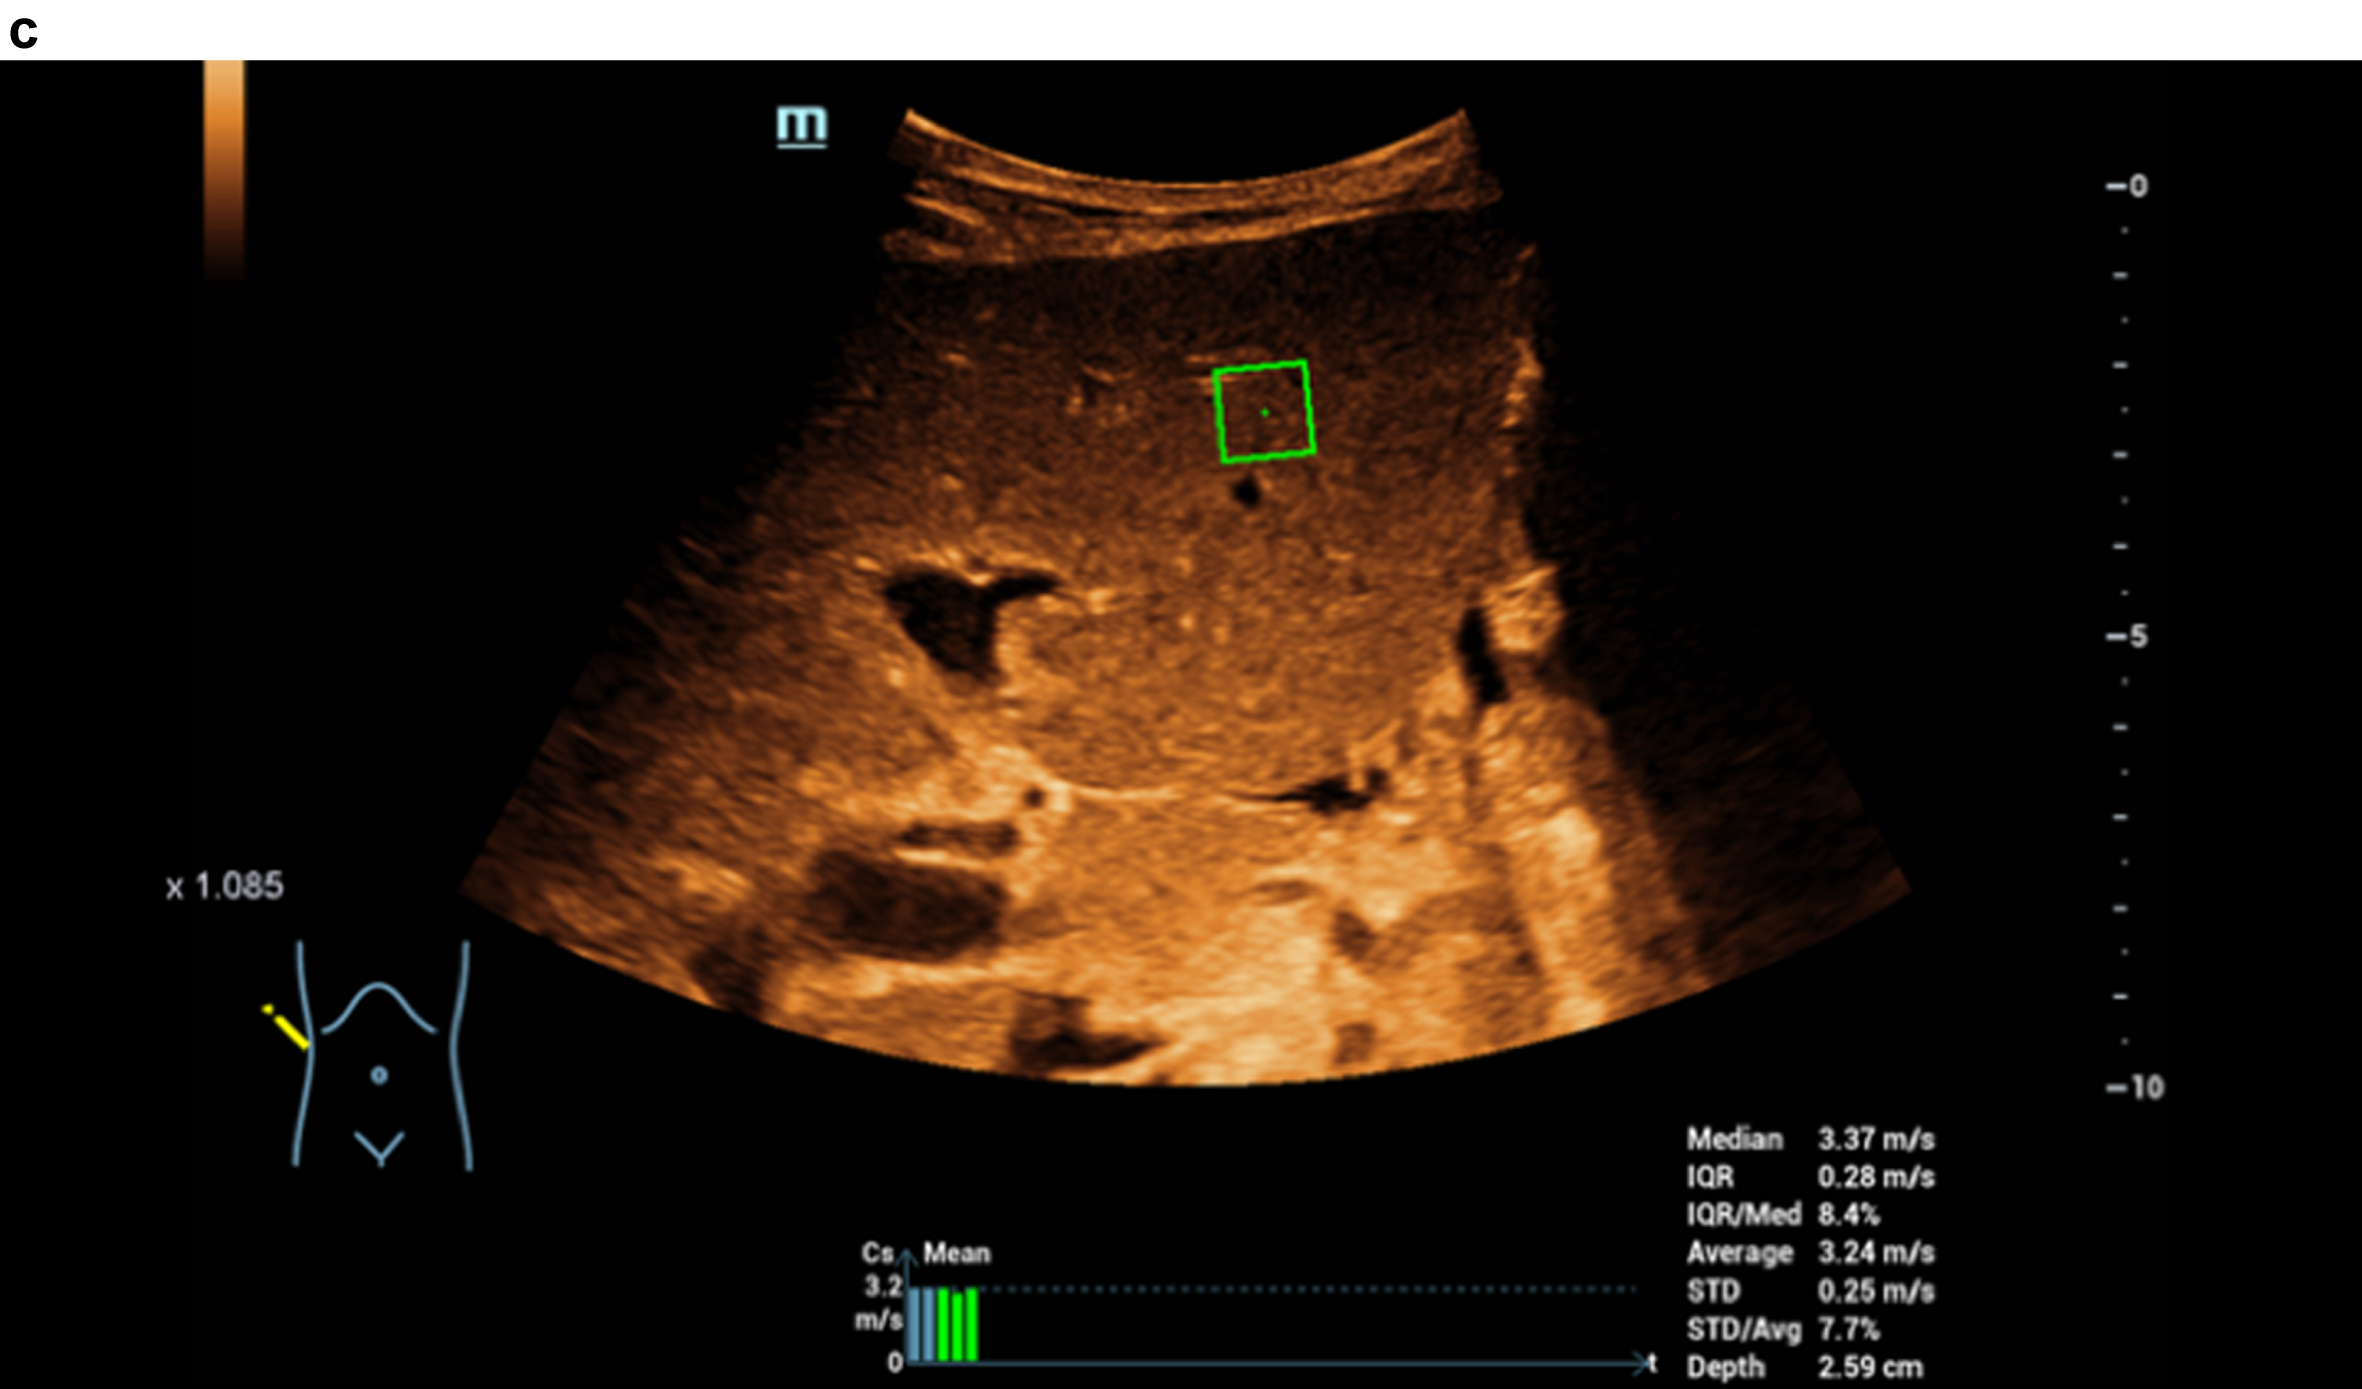 STQ shear wave elastography and readings up to 3.37 m/s as clear densification of the liver in cirrhosis.